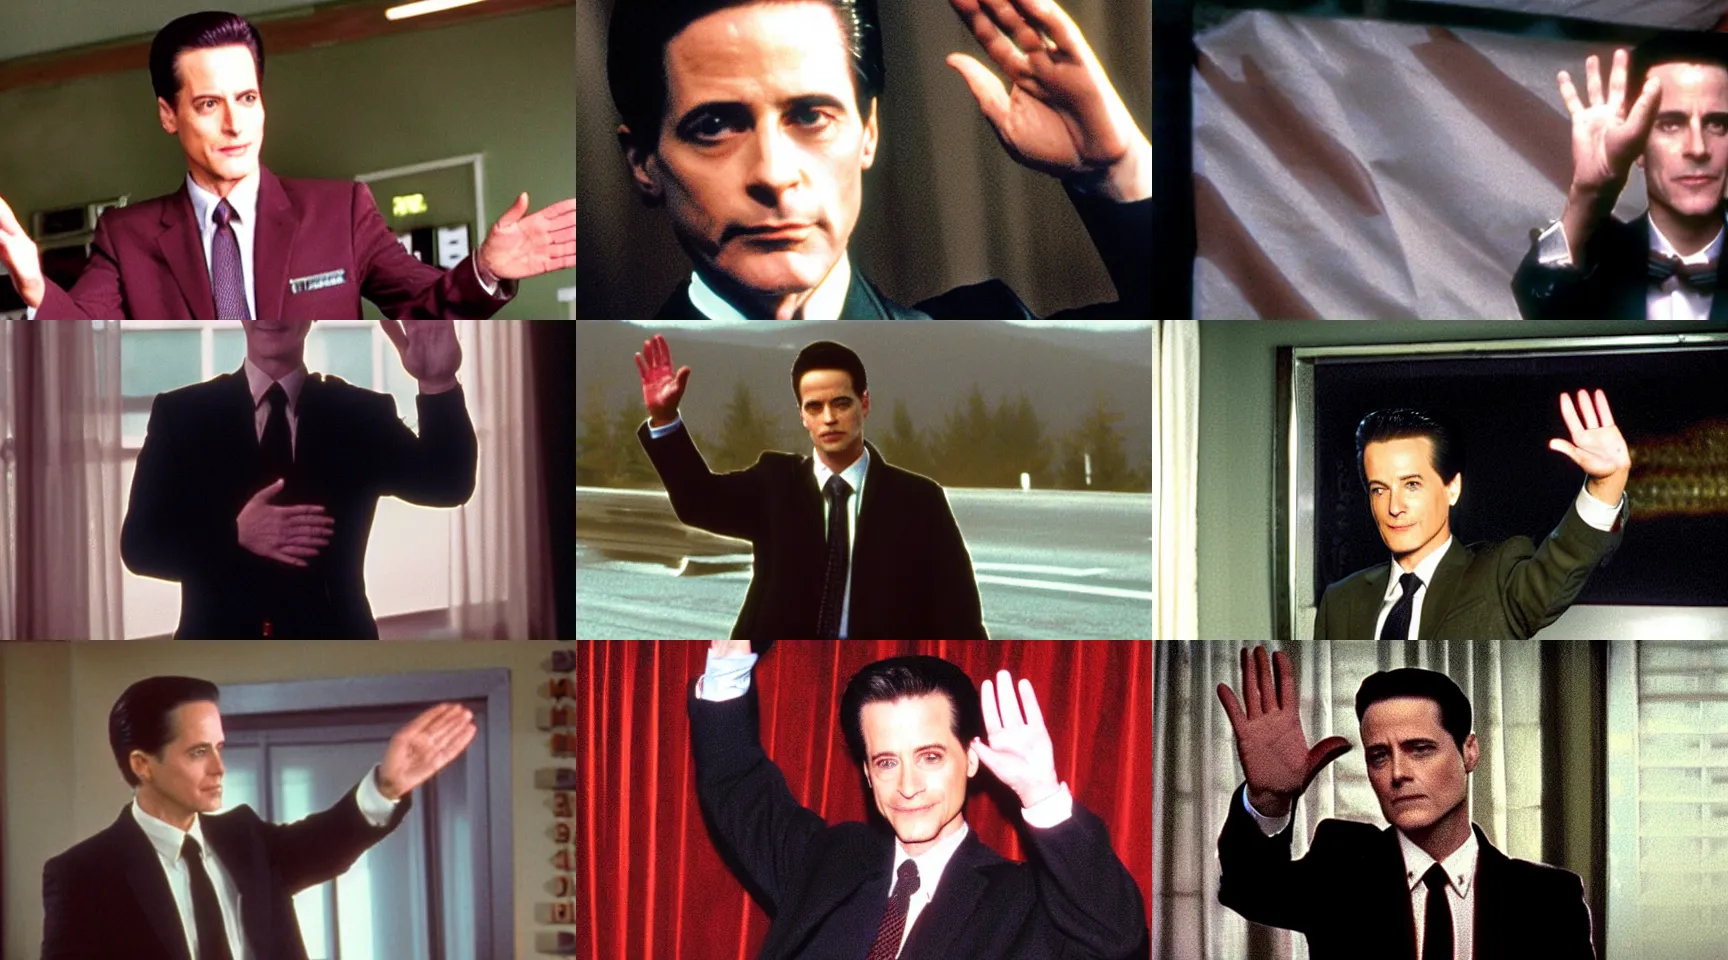 agent cooper from the tv show twin peaks waving goodbye | Stable ...